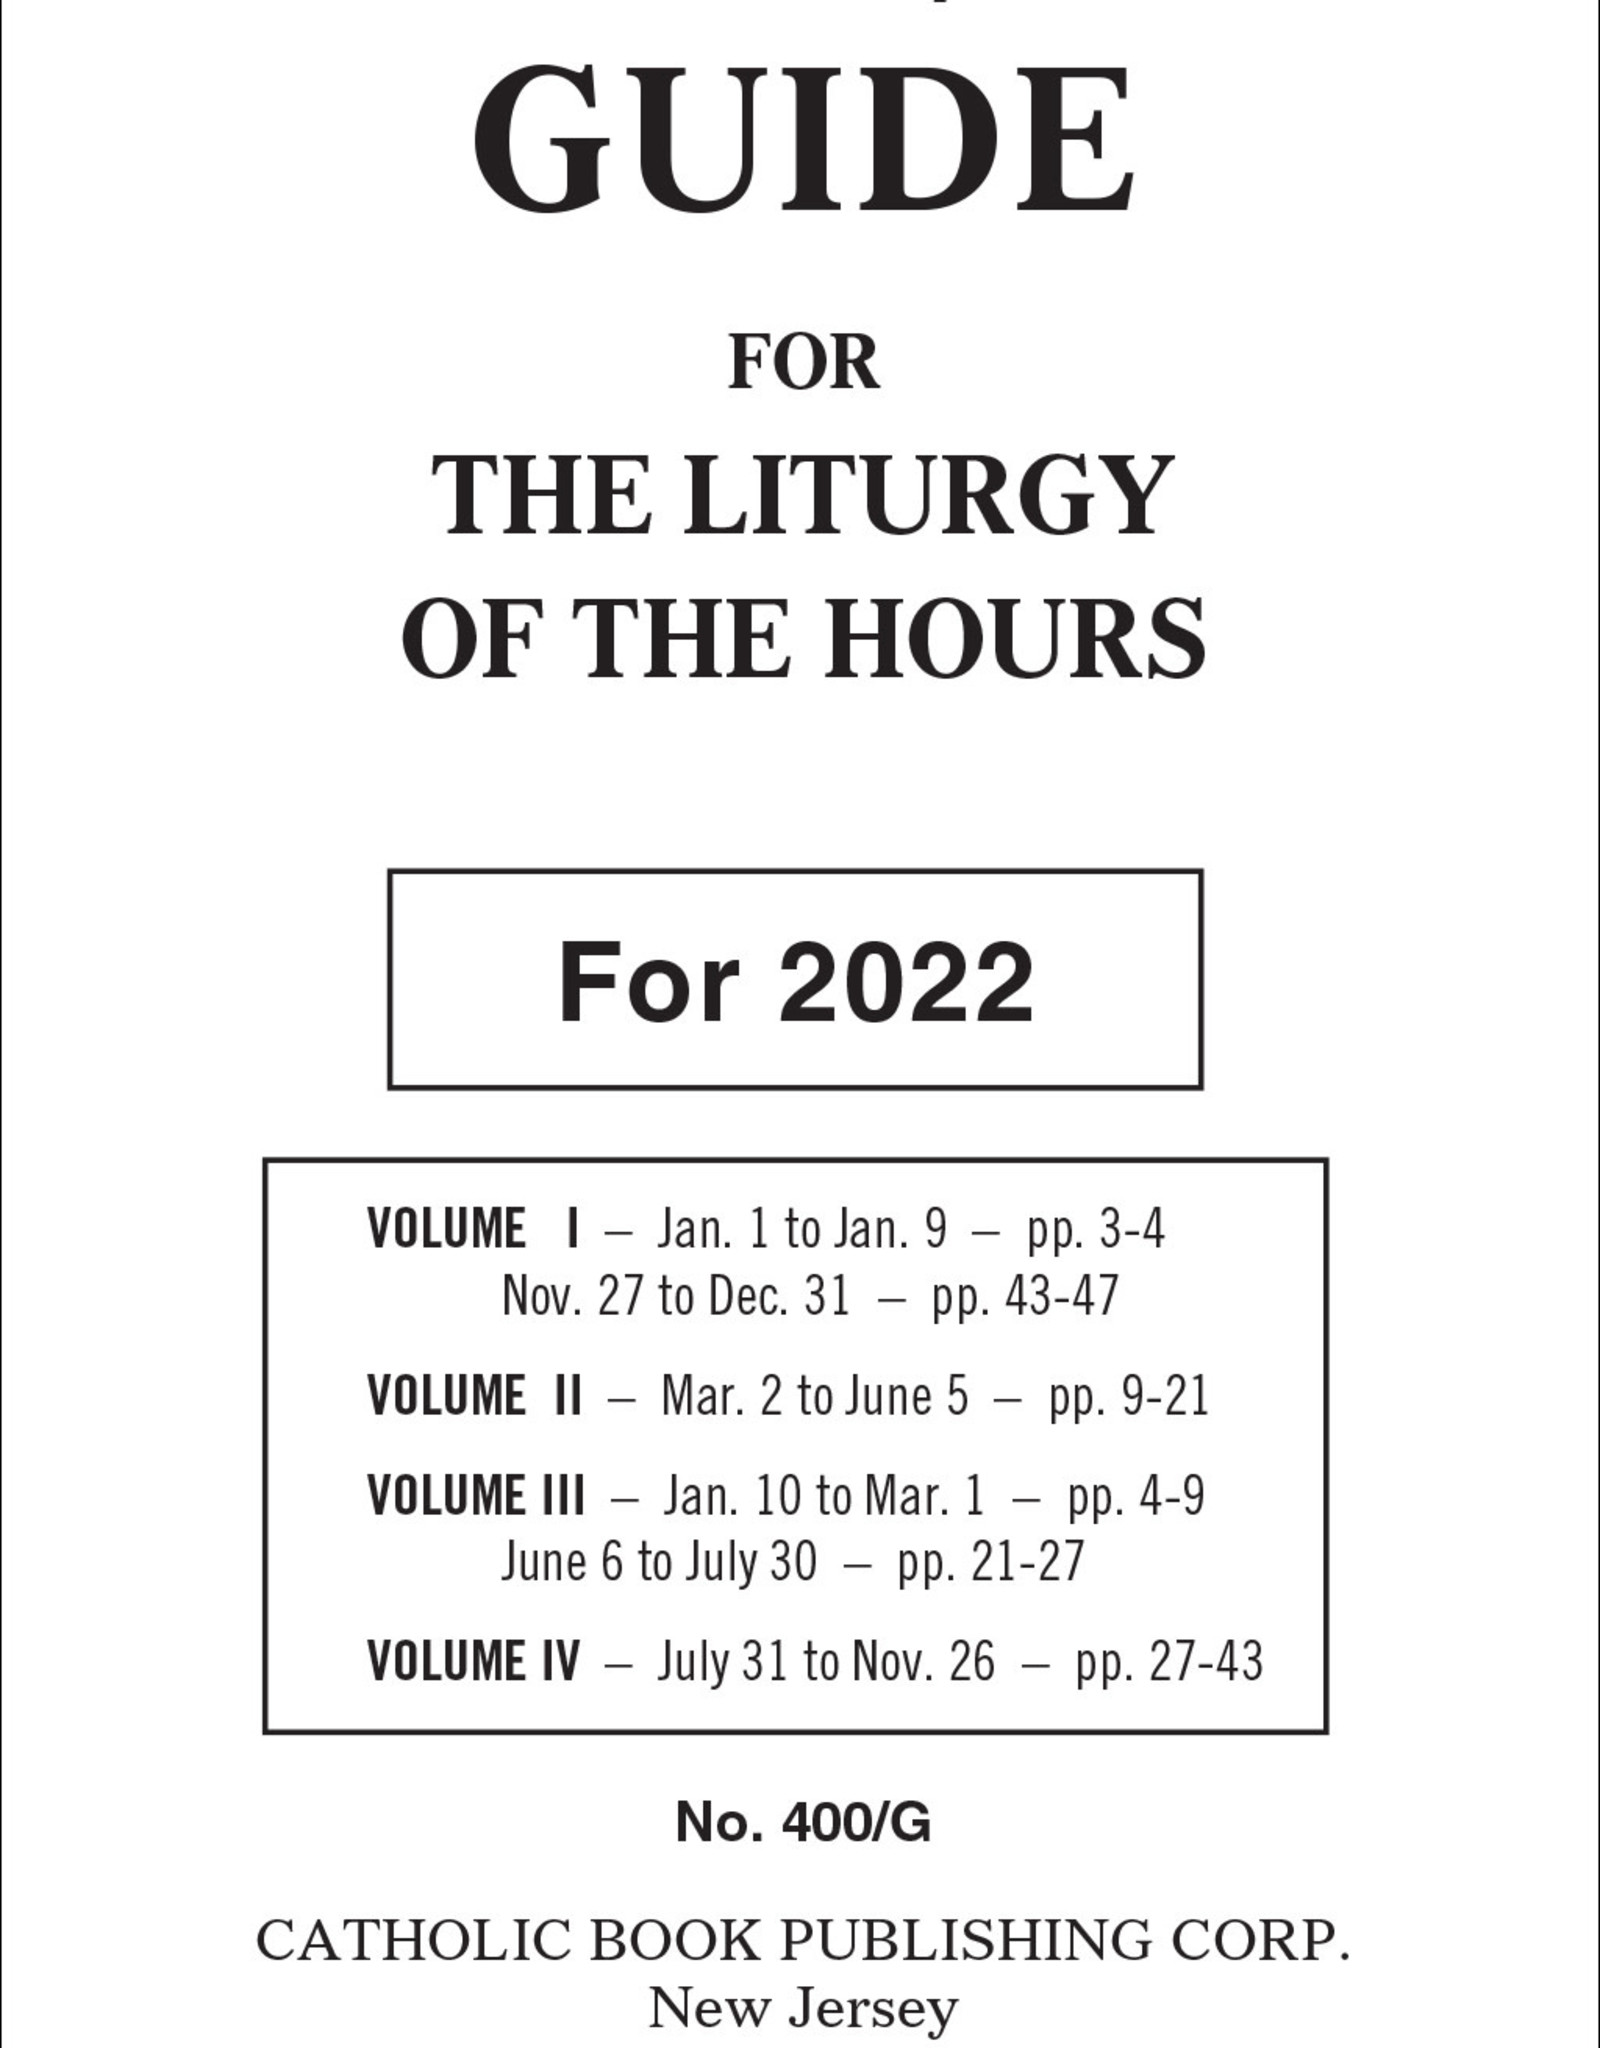 2022 Guide for the Liturgy of the Hours